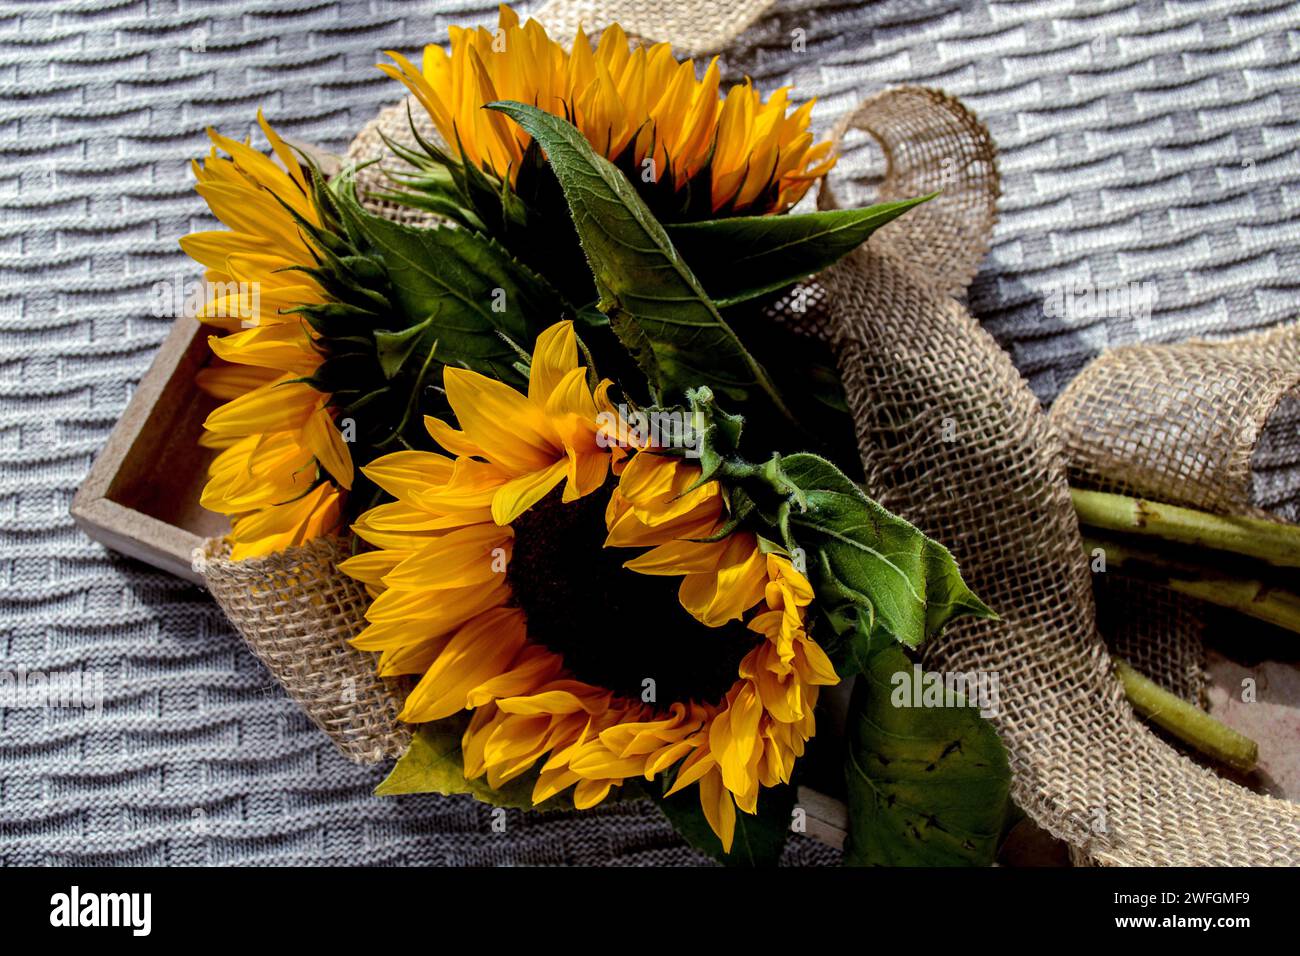 Three sunflowers in a wooden box on a knitted plaid Stock Photo